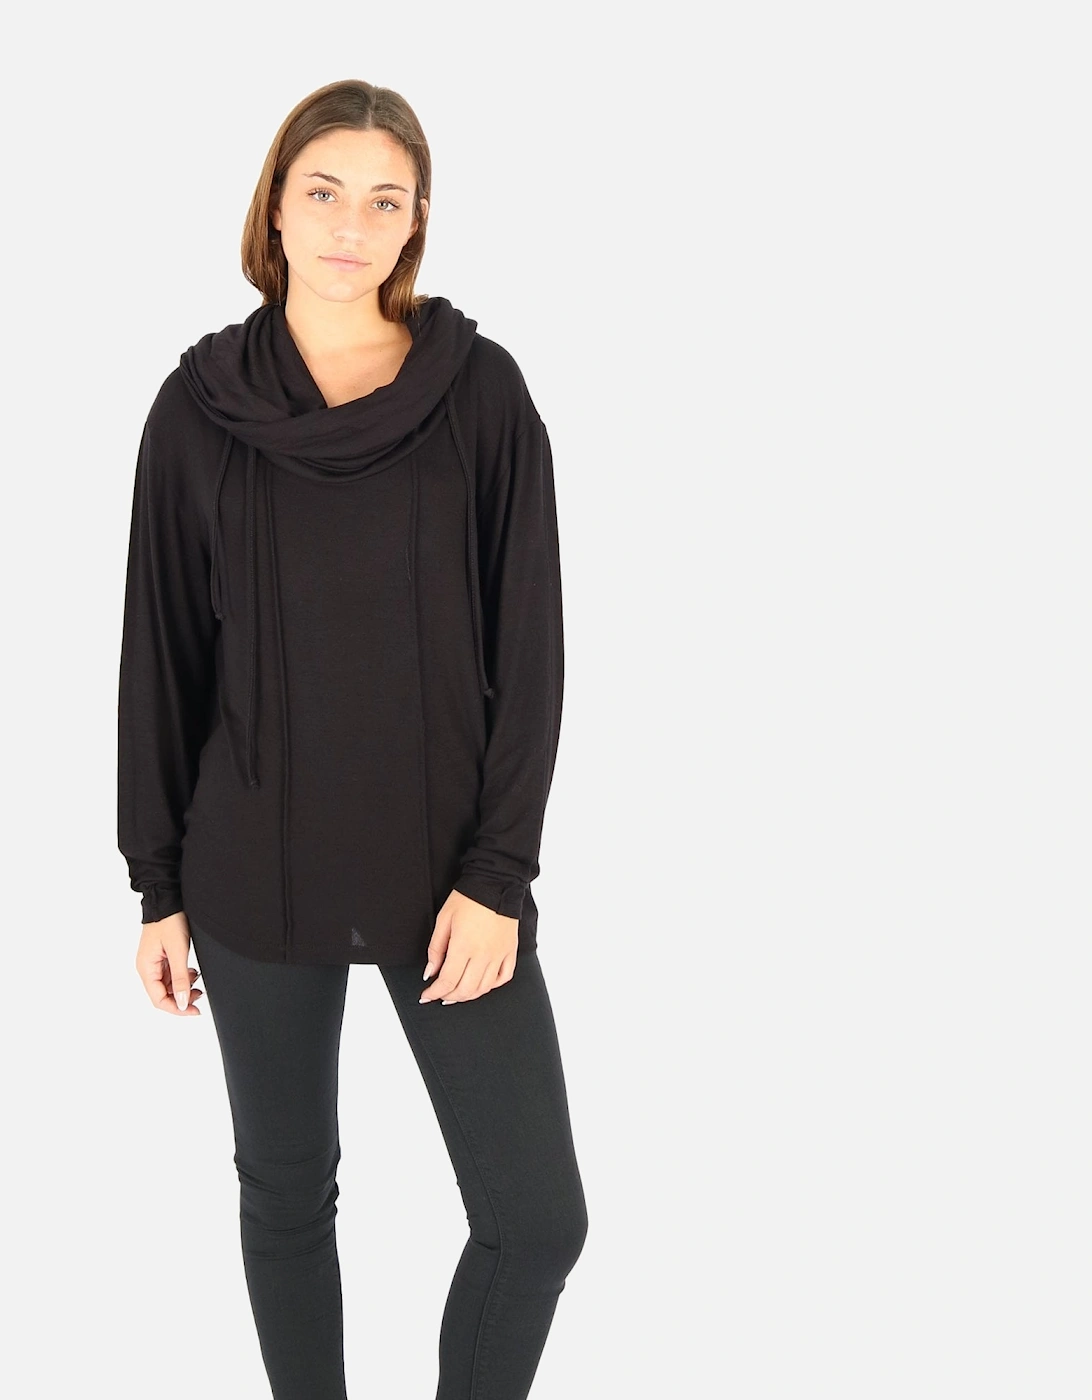 Slouch Neck LS Black Top